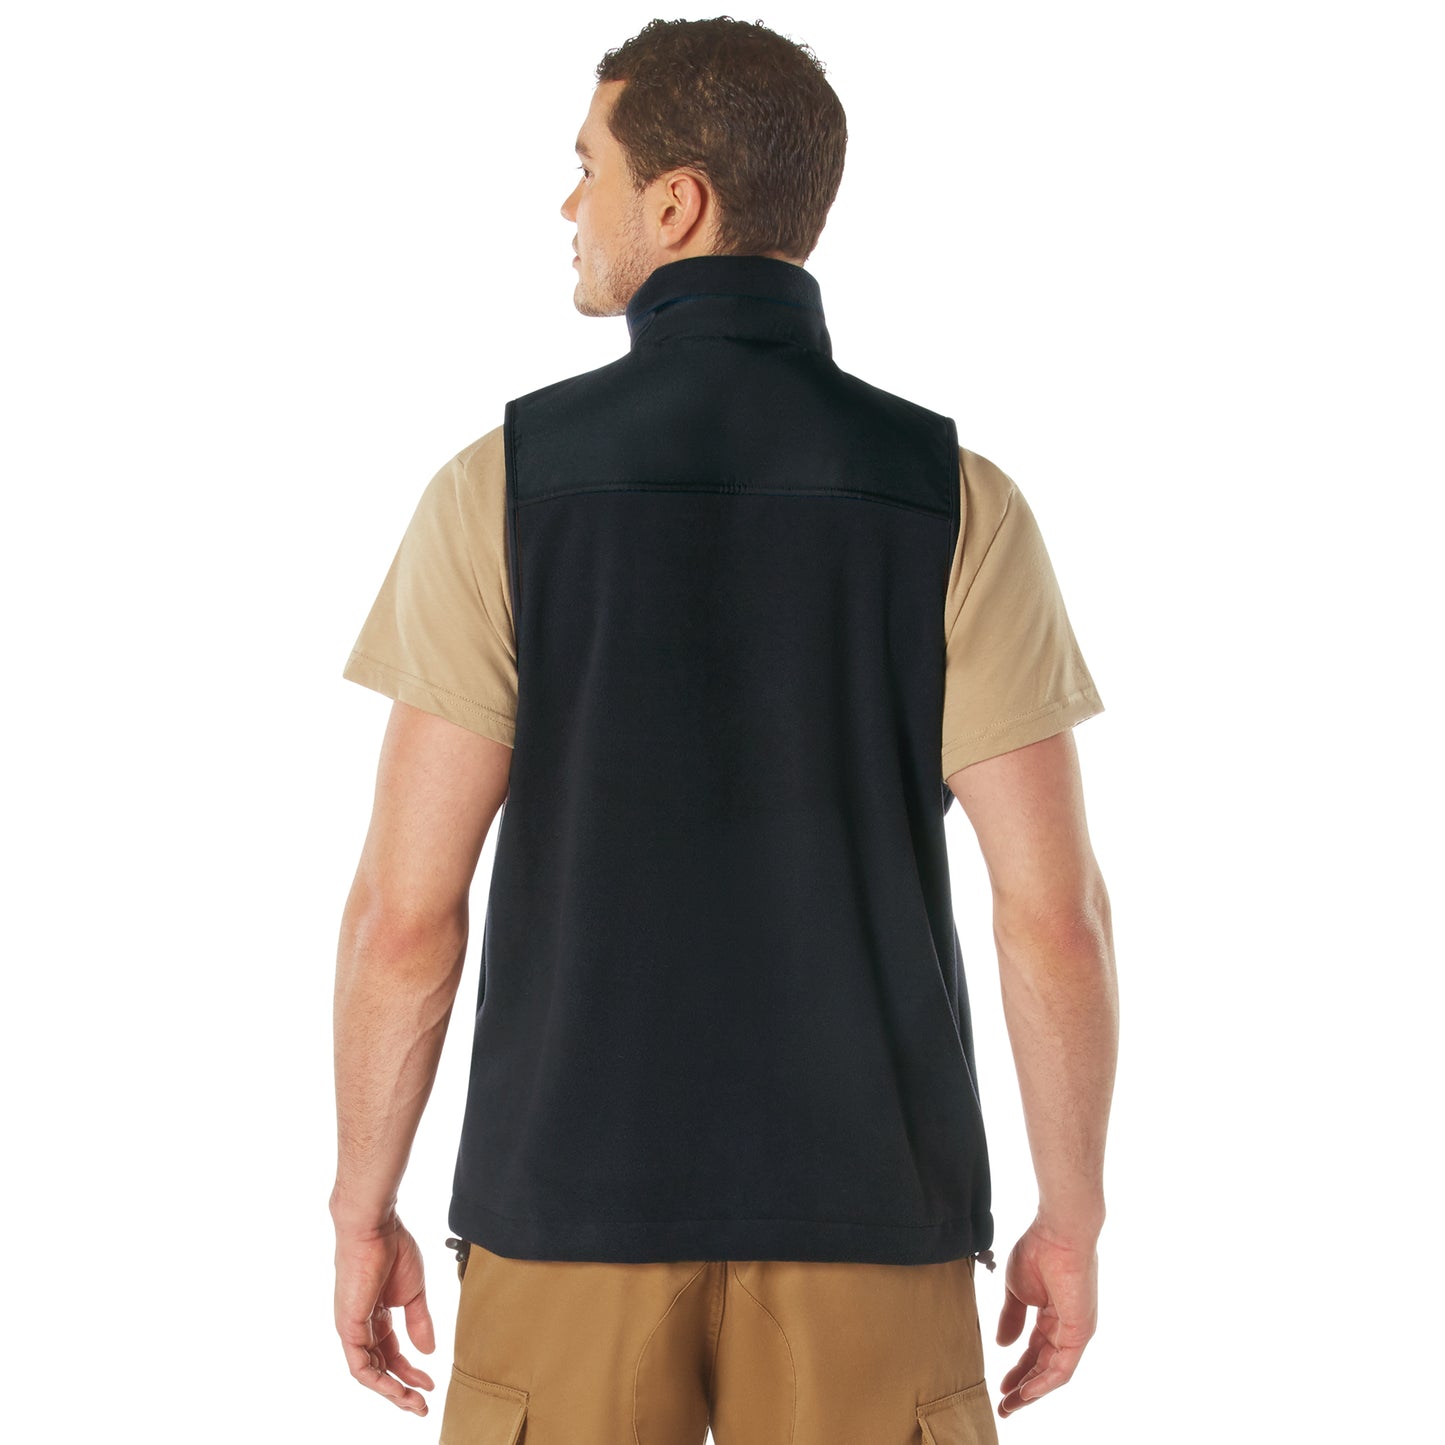 Rothco Spec Ops Tactical Vest